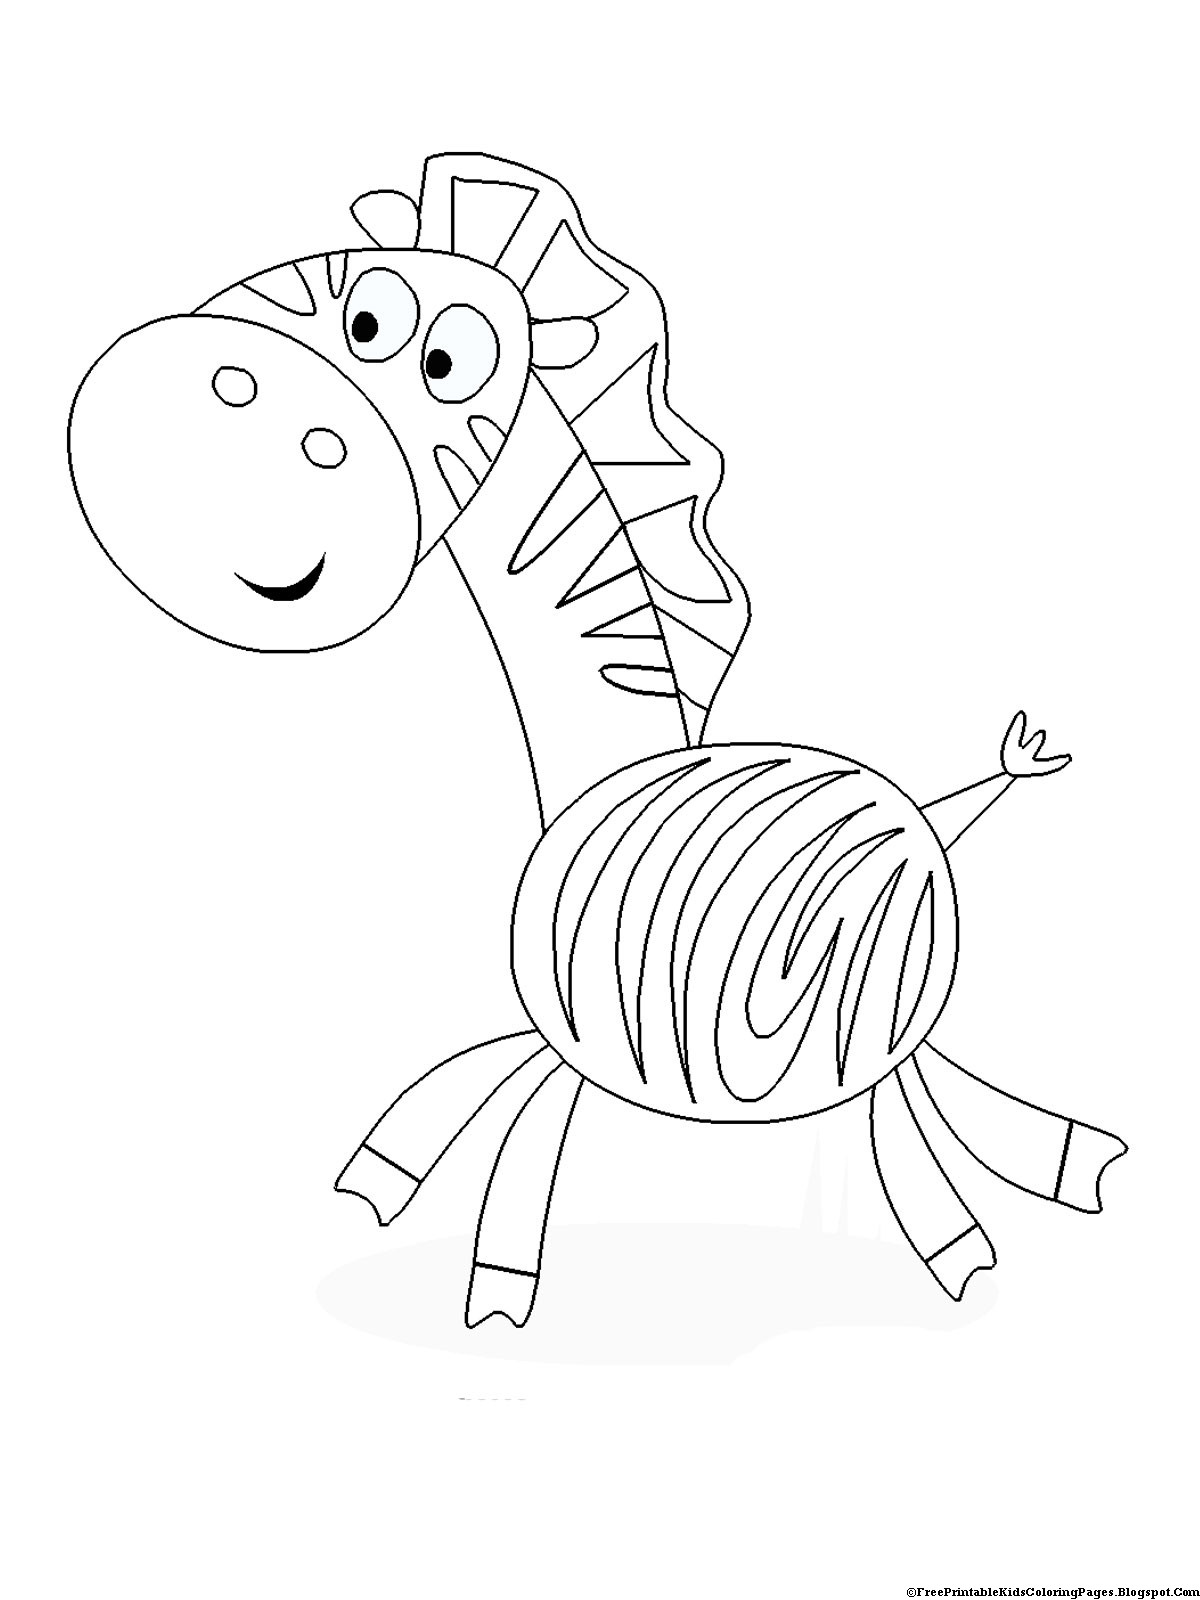 Kids Coloring Book
 Zebra Coloring Pages